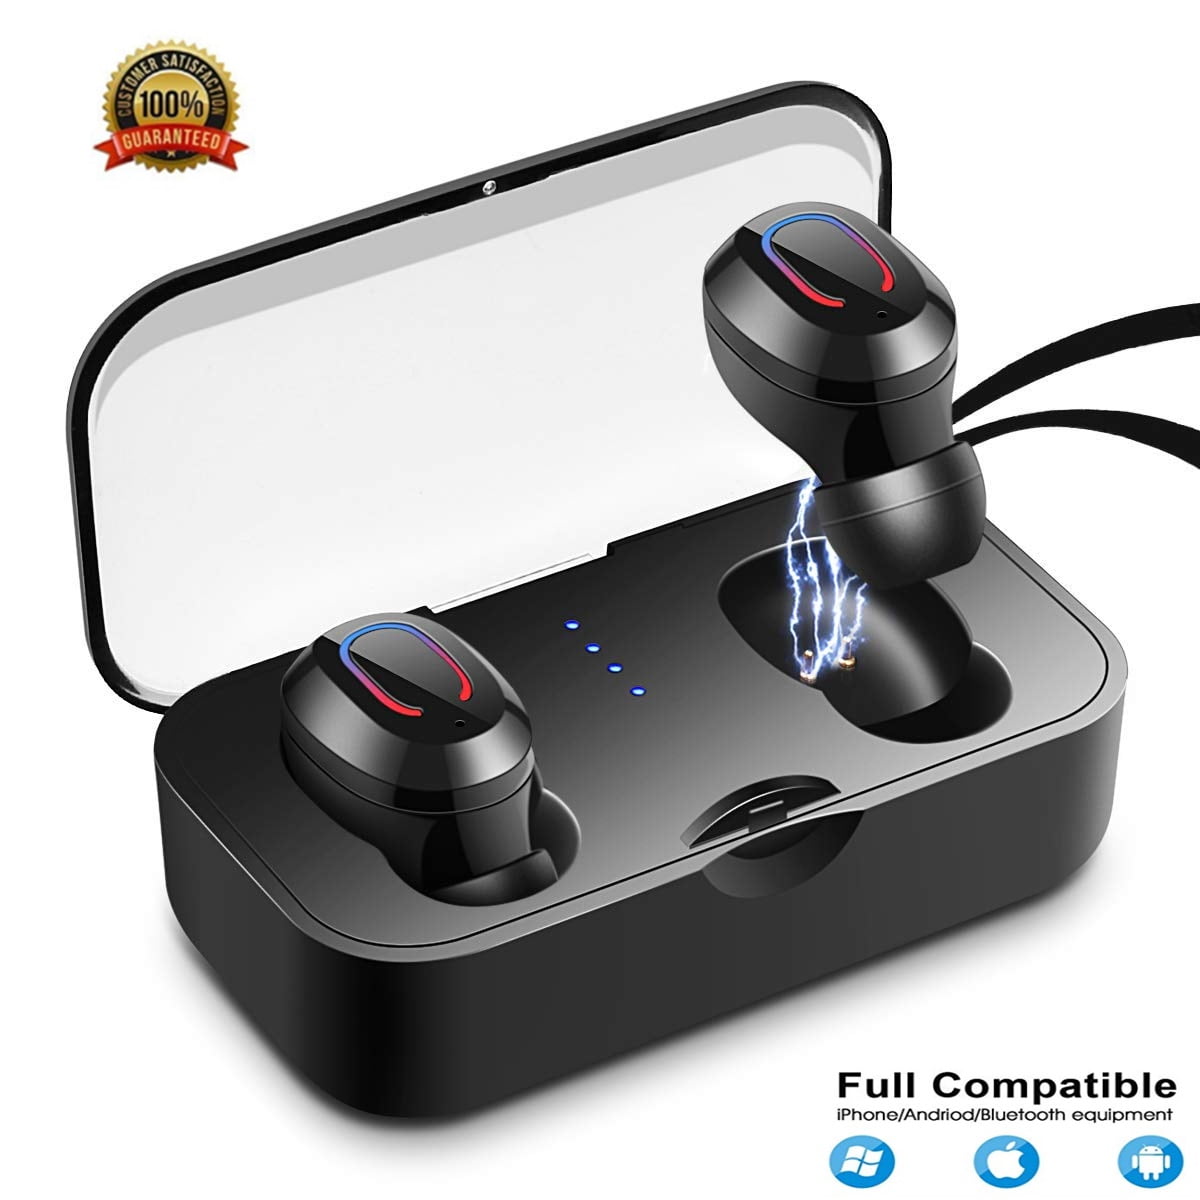 Wireless Headphones, Wireless Earbuds Stereo Earphone Cordless Sport Headsets for iphone 7, 8 plus, X, plus, 6s, 6S Plus or Android